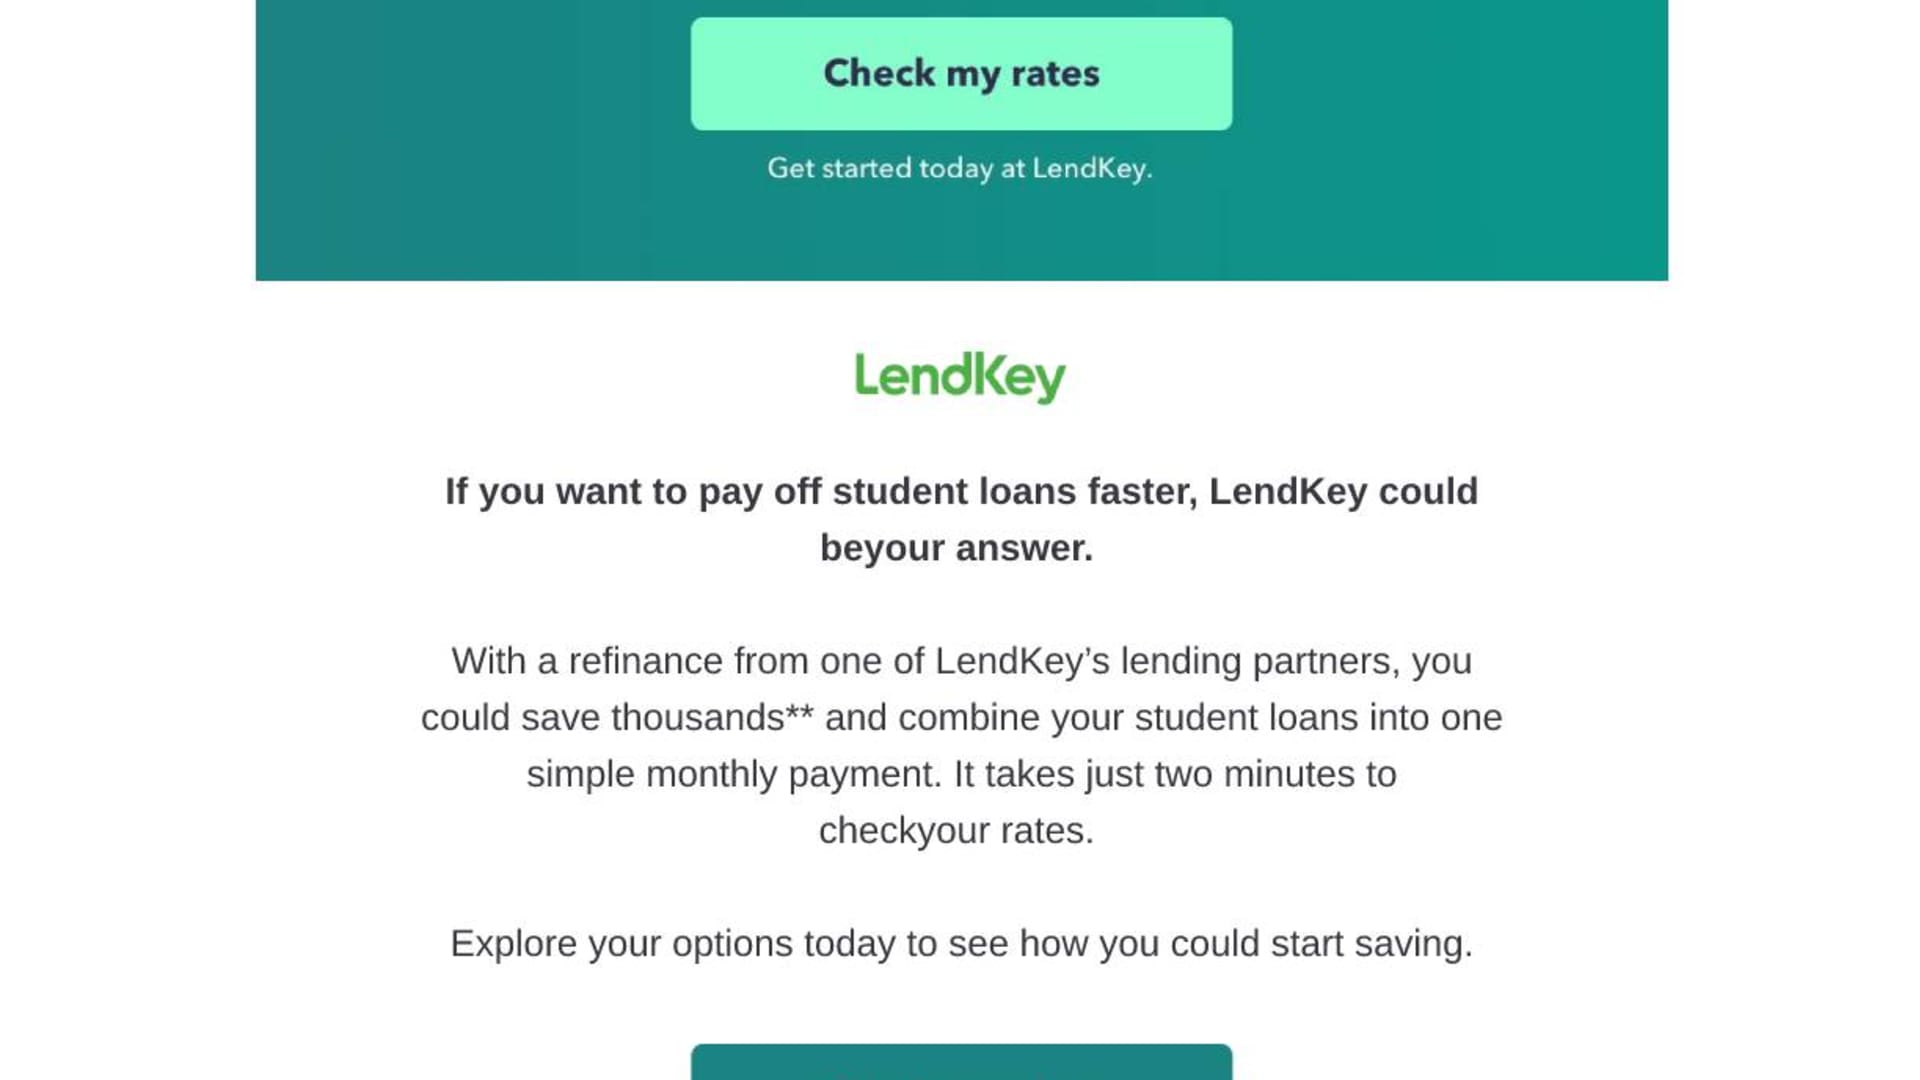 Mint sent an email to users this week on behalf of an ad partner touting the bonuses available for those who refinance their student loans. 